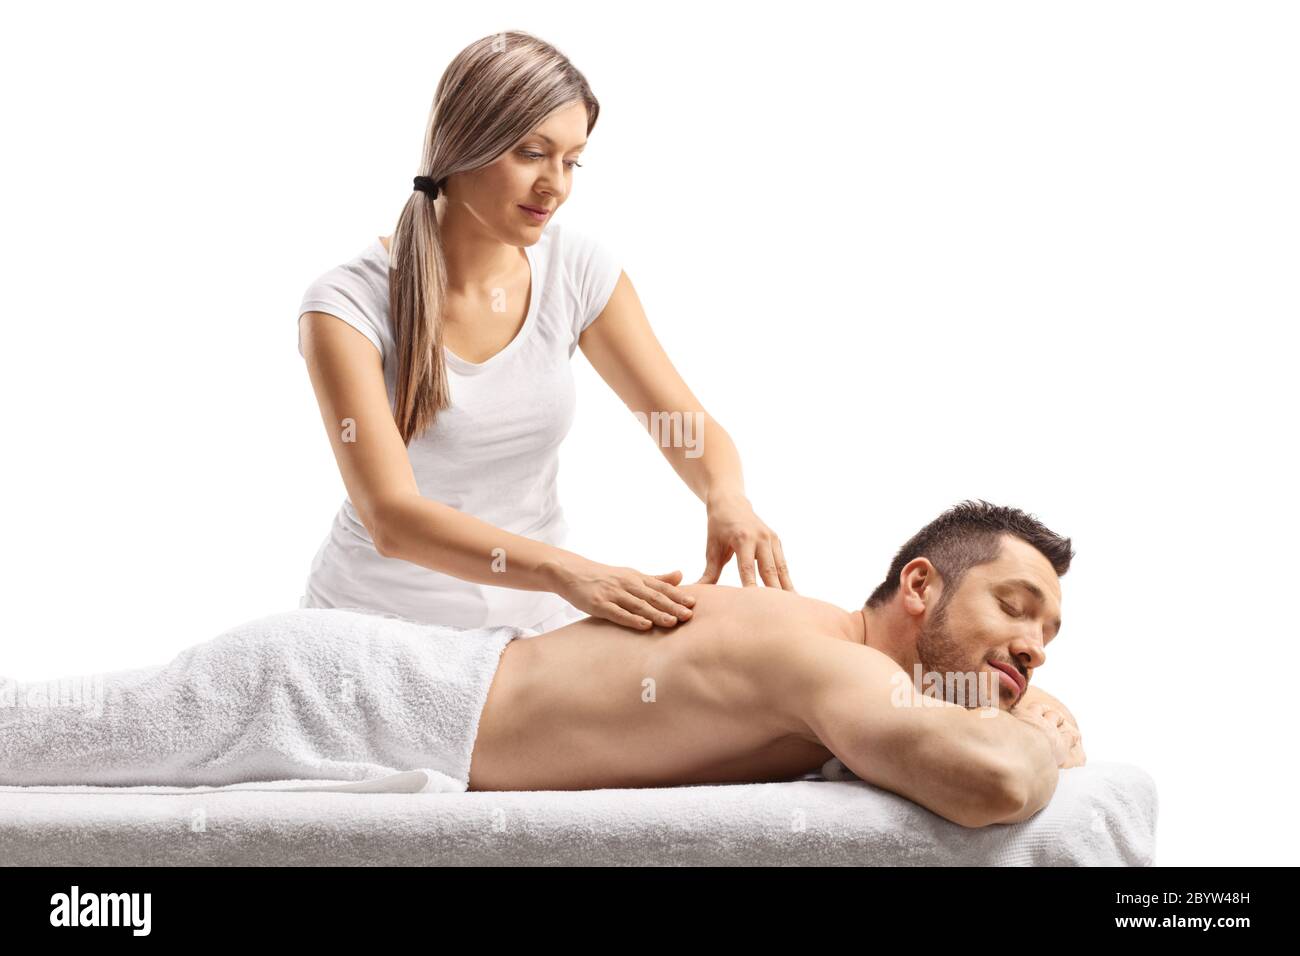 Skillful masseur fingers his clients during a hot massage